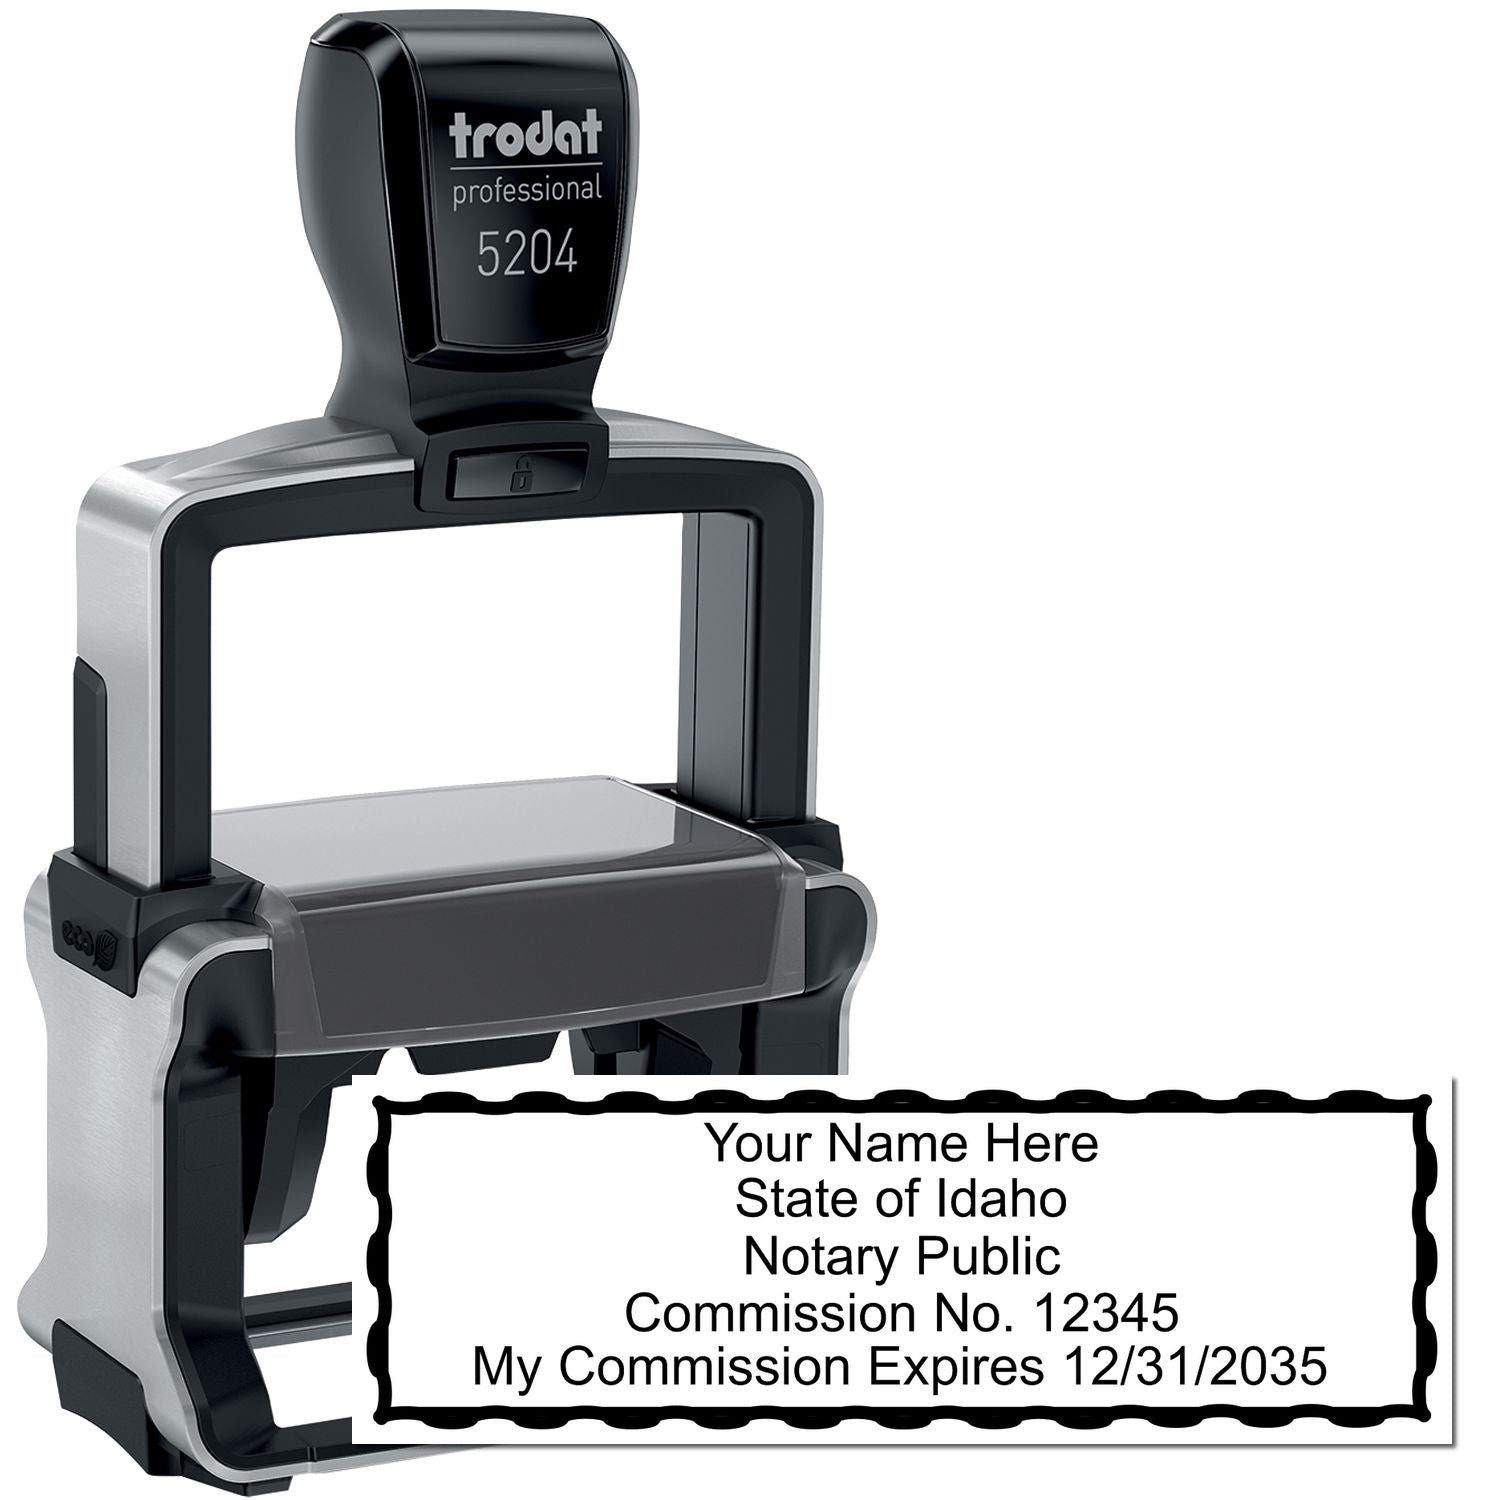 The main image for the Heavy-Duty Idaho Rectangular Notary Stamp depicting a sample of the imprint and electronic files